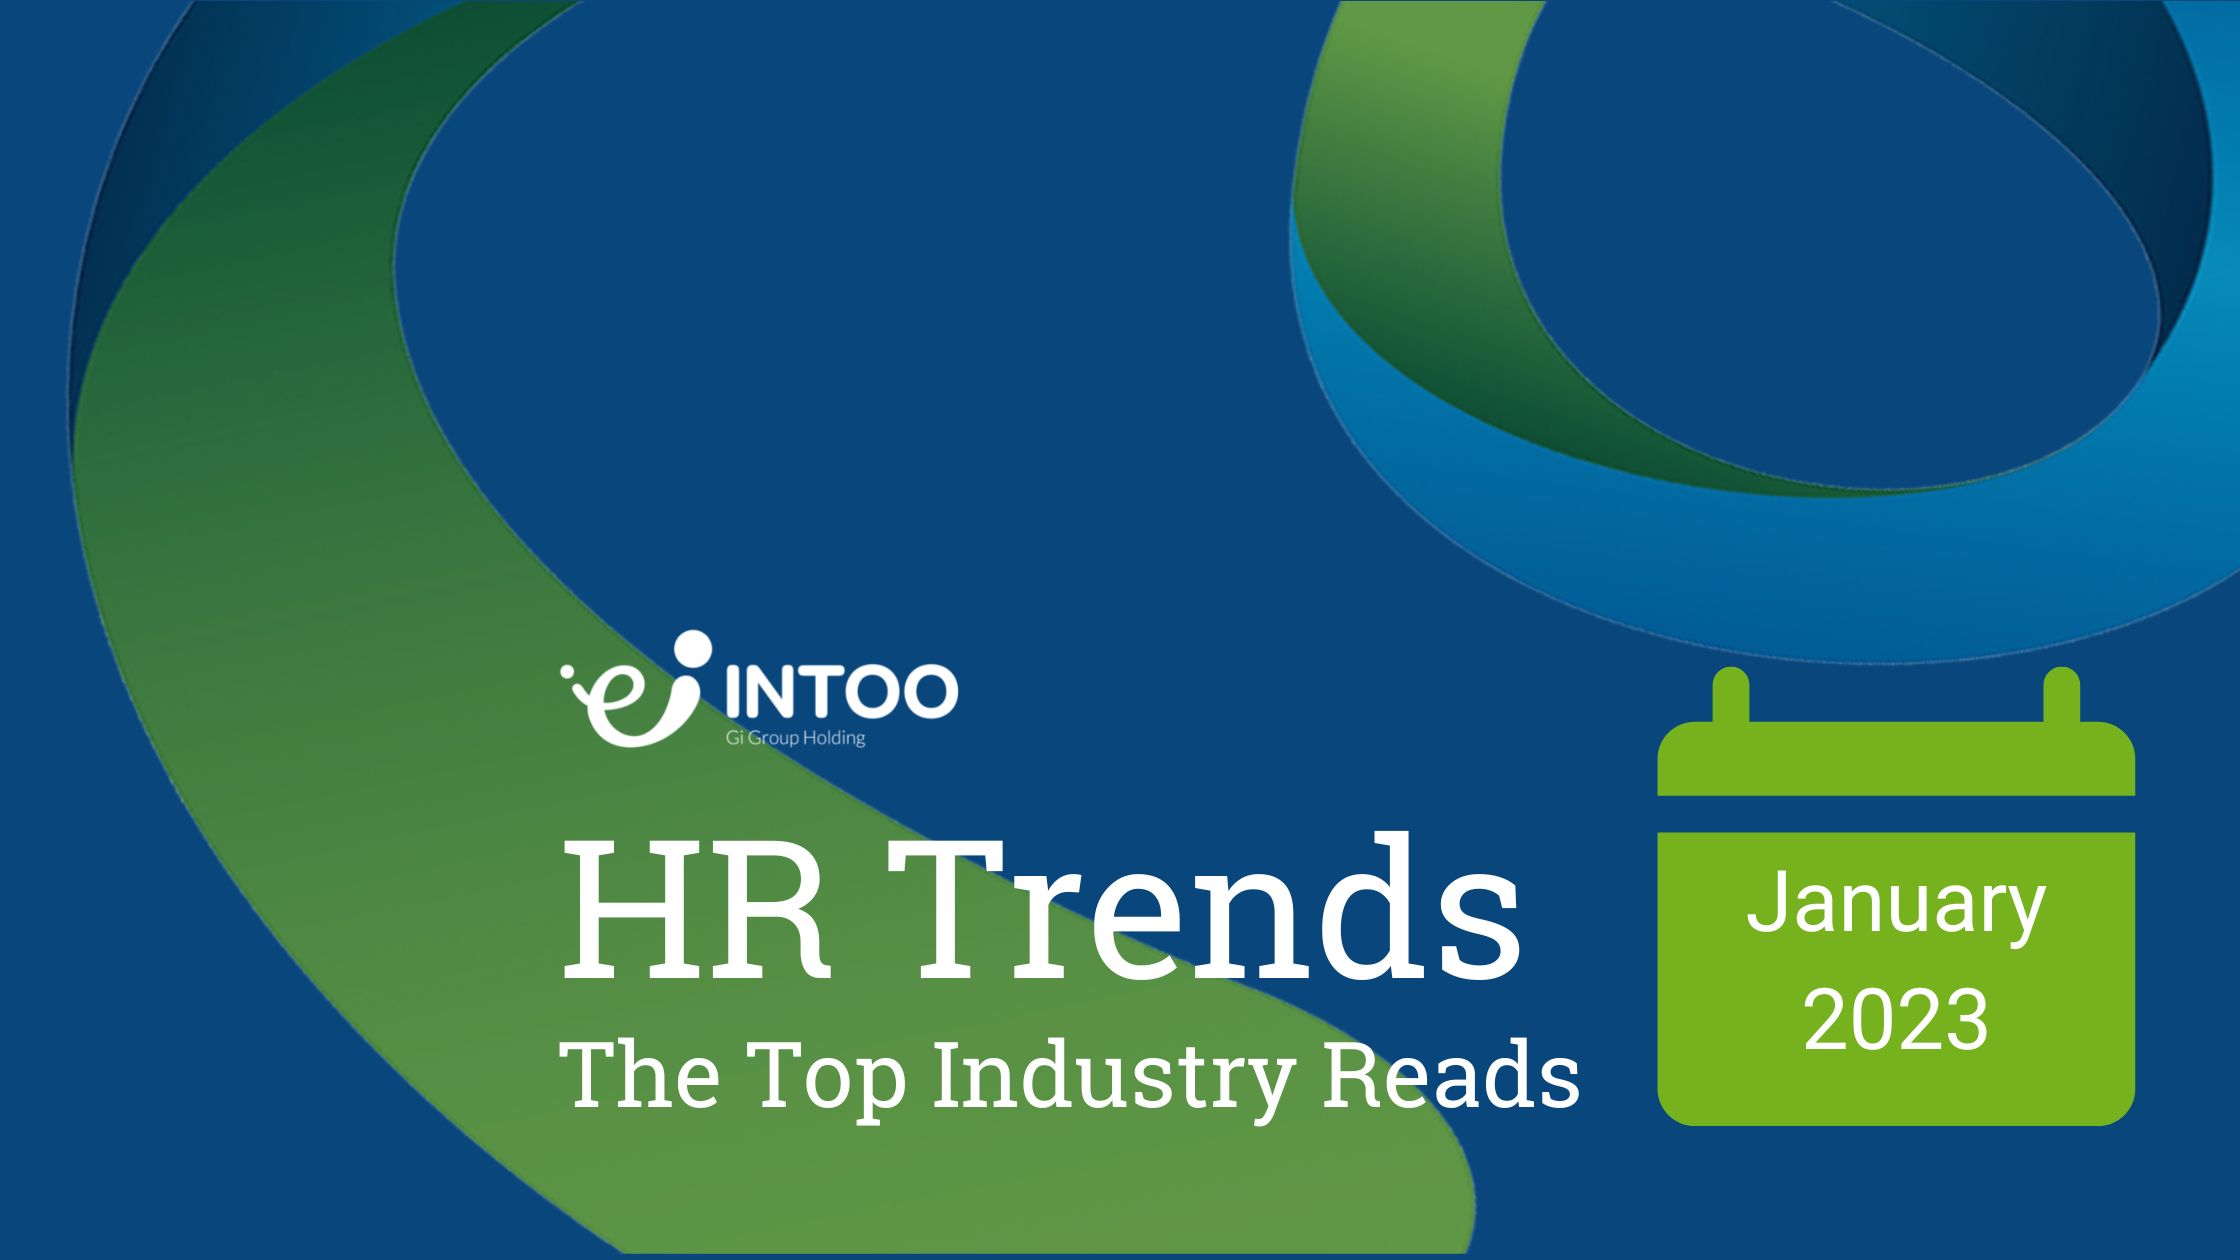 HR Trends January 2023: The Top Industry Reads